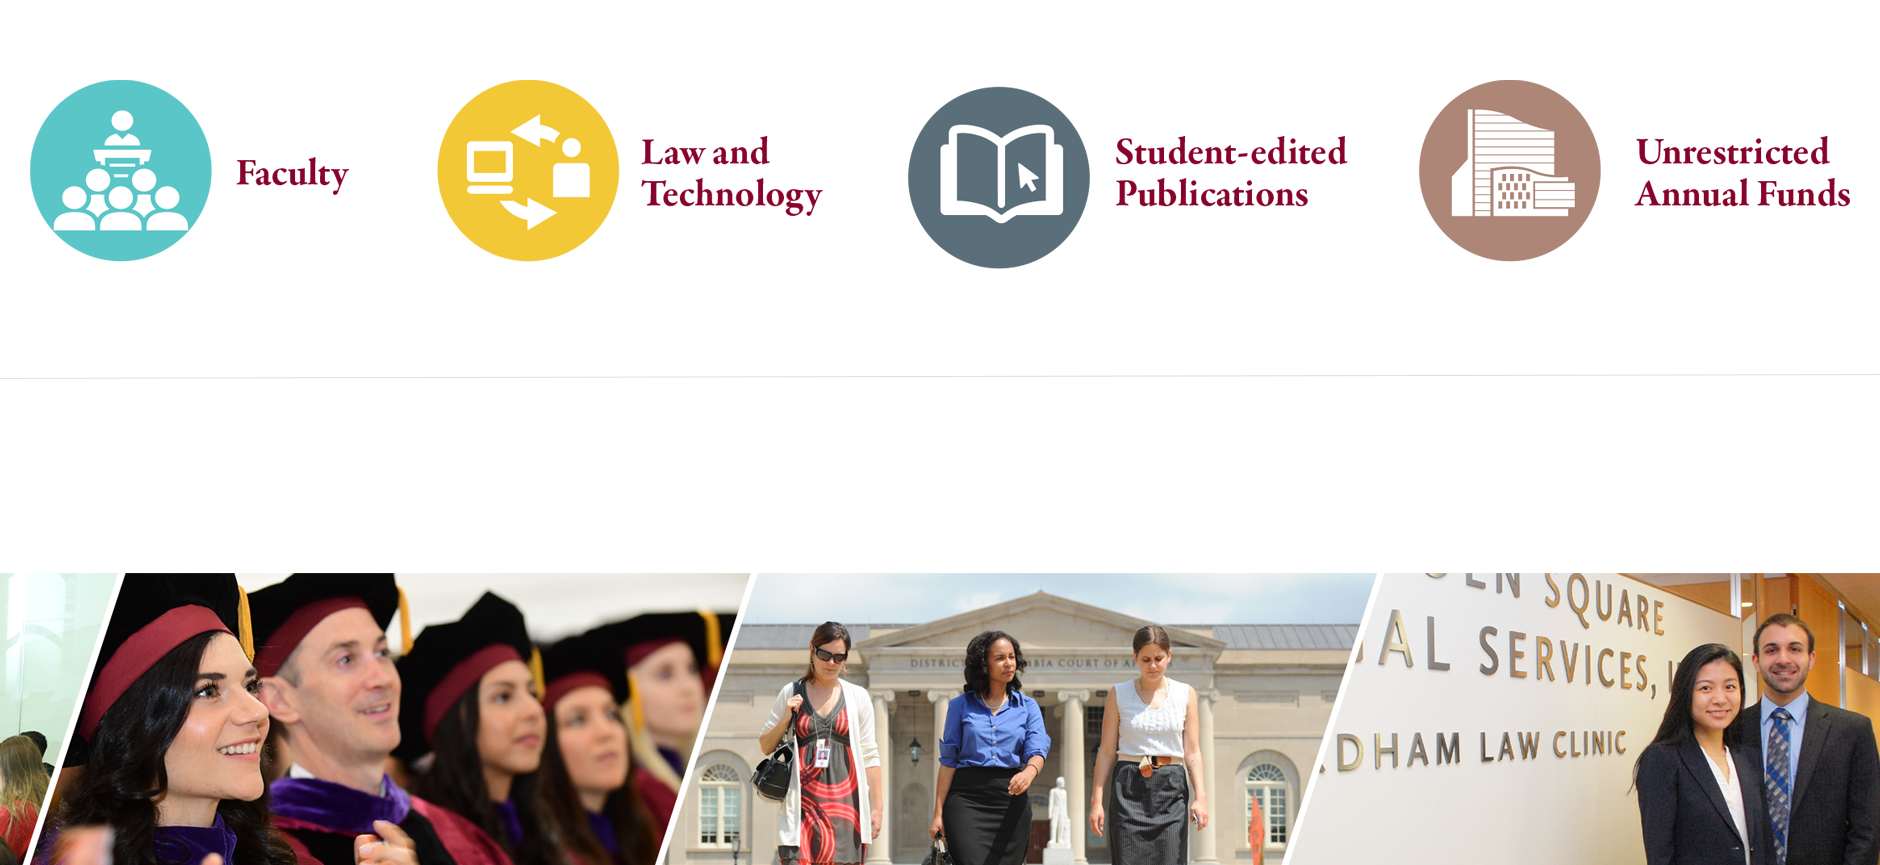 Faculty, Law and Technology, Student-edited Publications, and Unrestricted Annual Funds